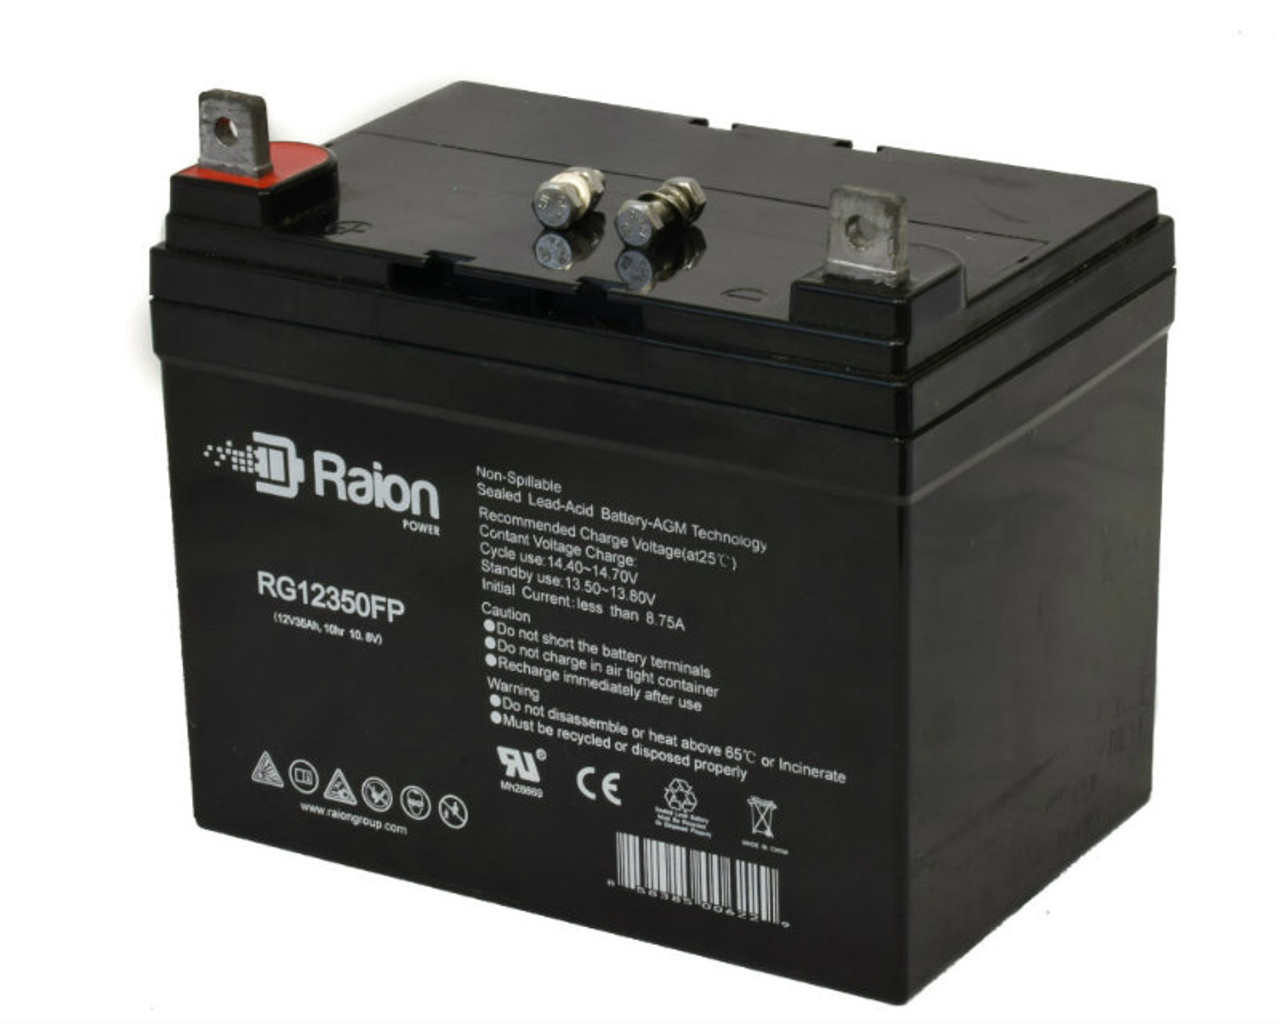 Raion Power Replacement 12V 35Ah RG12350FP Battery for BB HRL40-12F